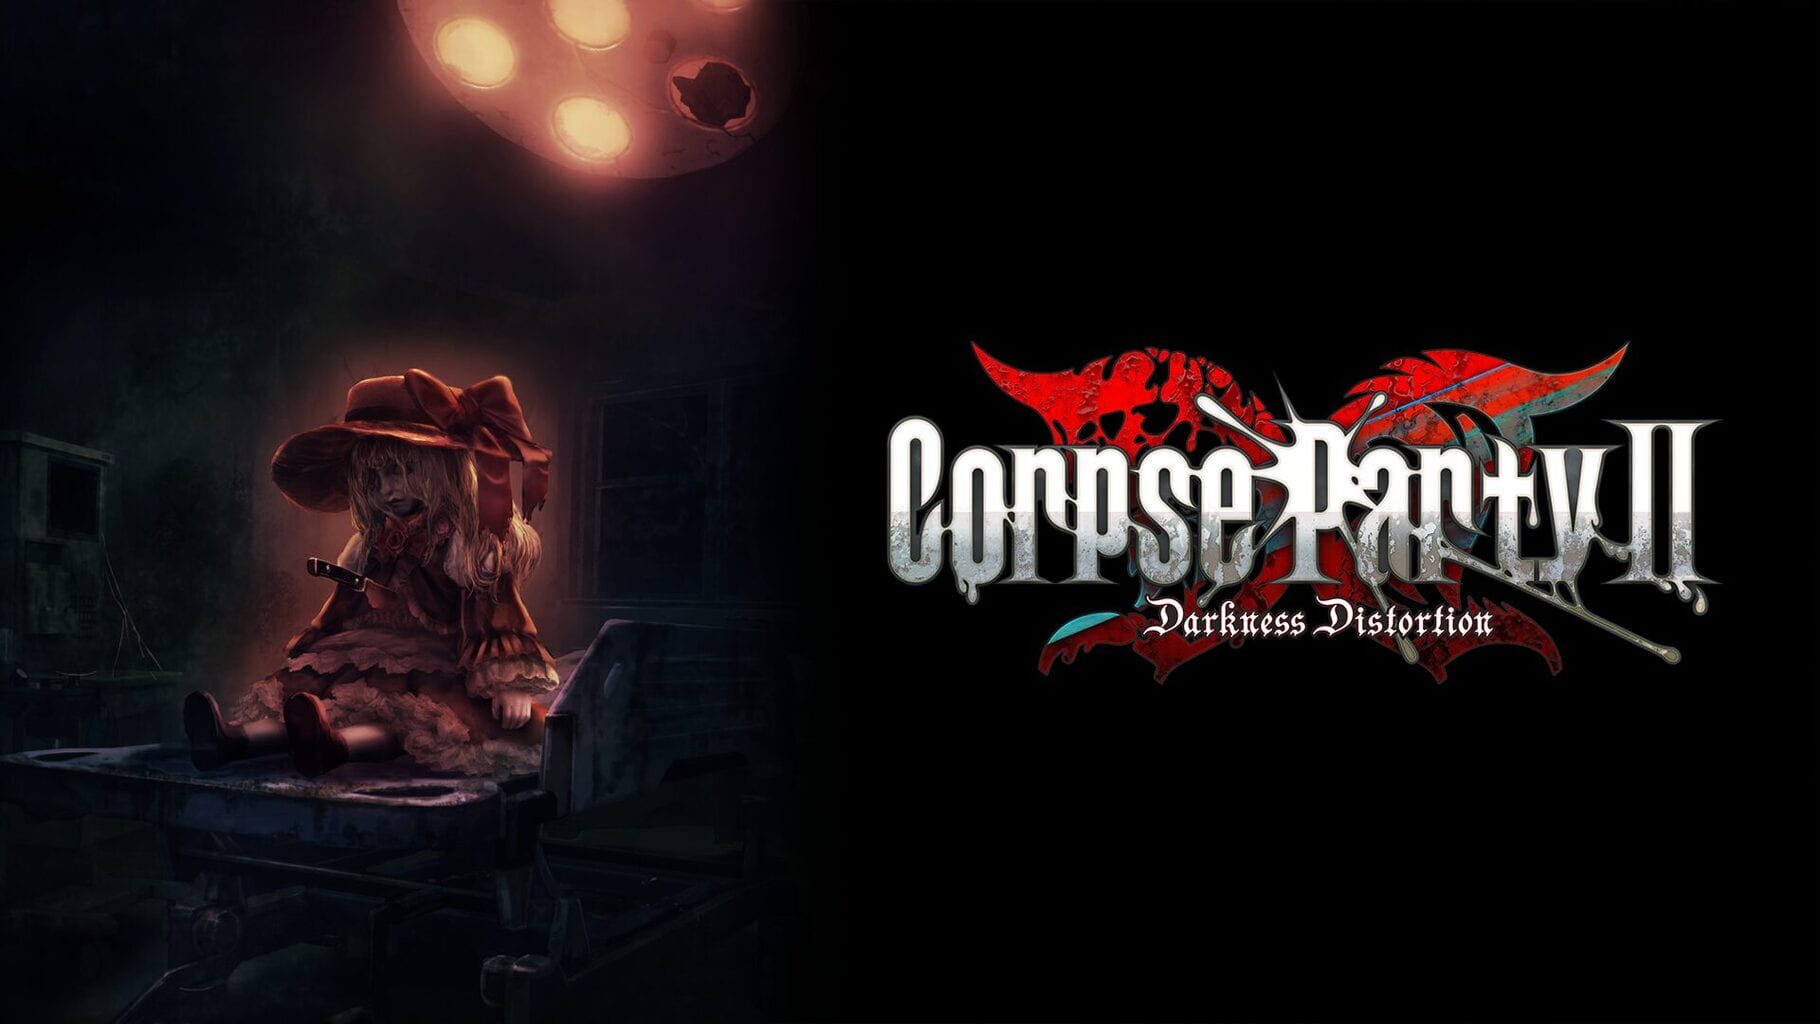 Artwork for Corpse Party II: Darkness Distortion